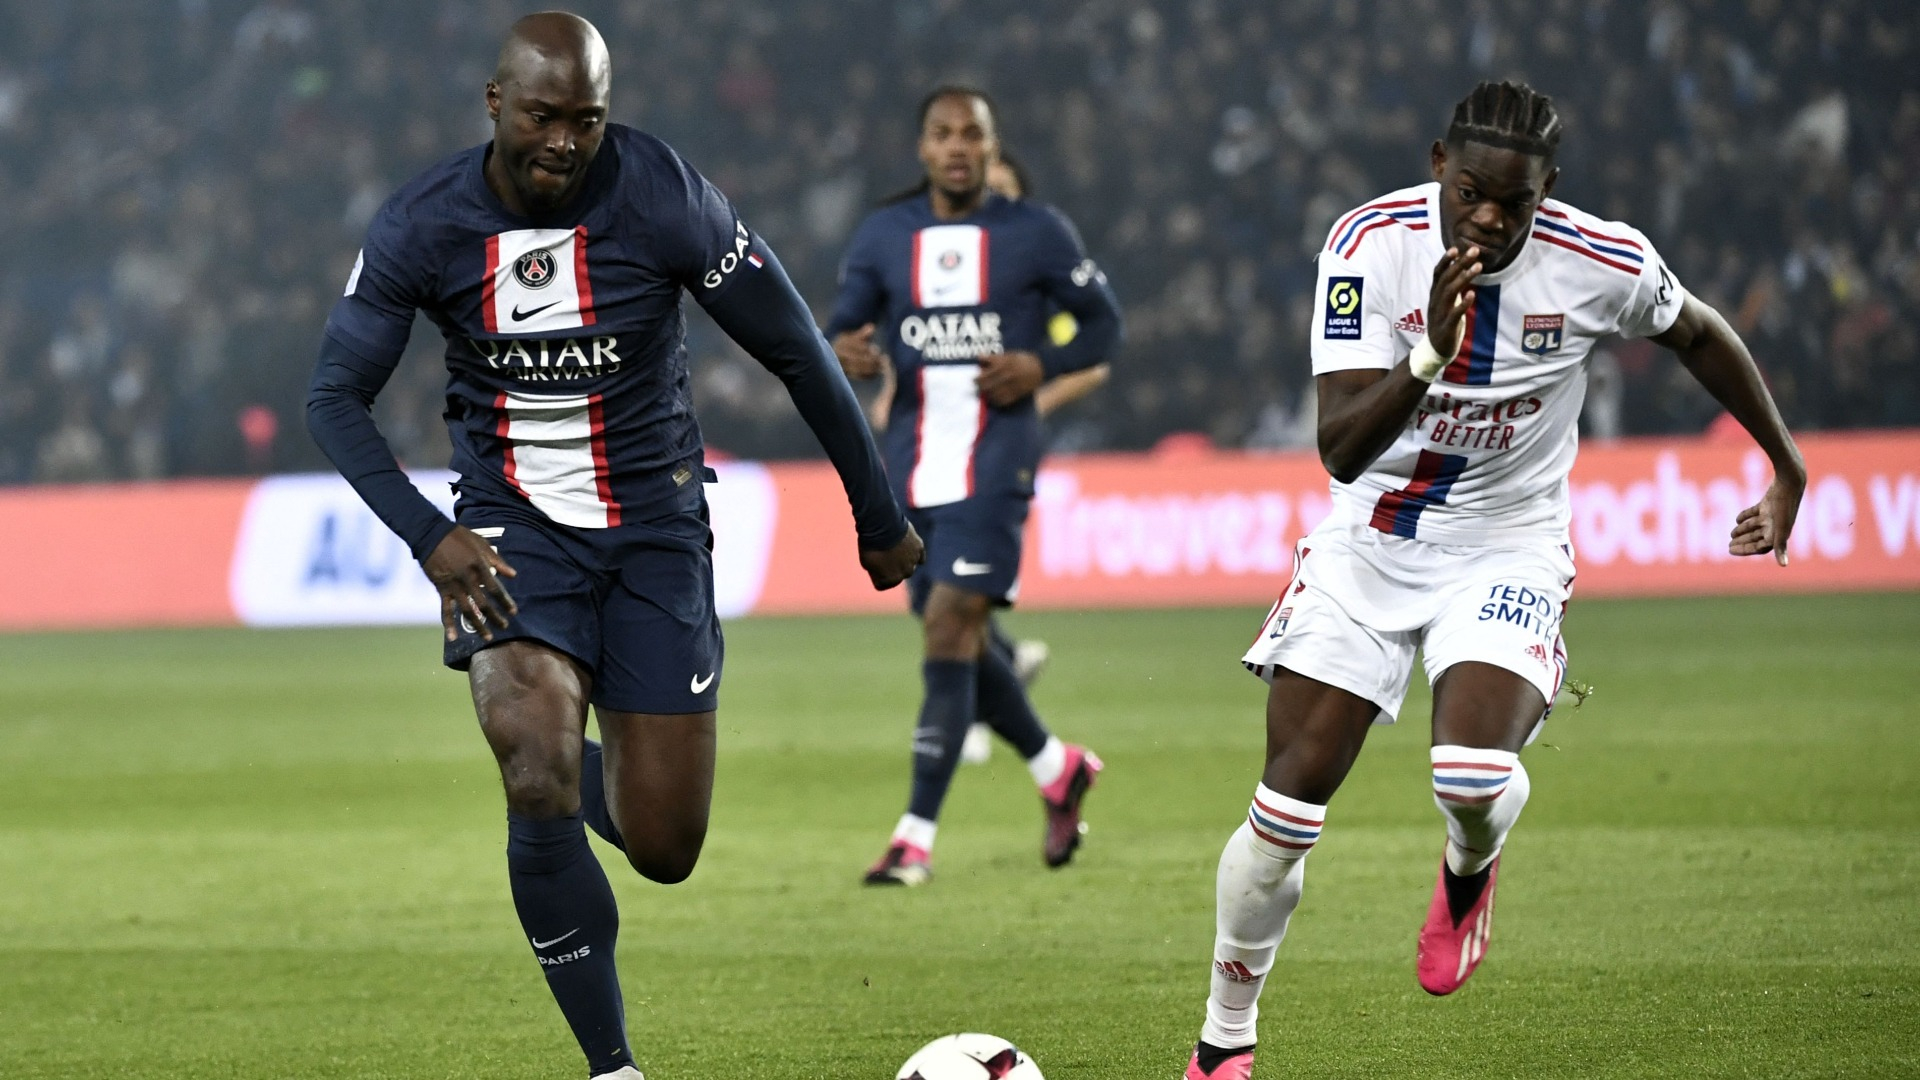 PSG's Danilo Pereira Explains Why Team Is Spiraling Out of Control